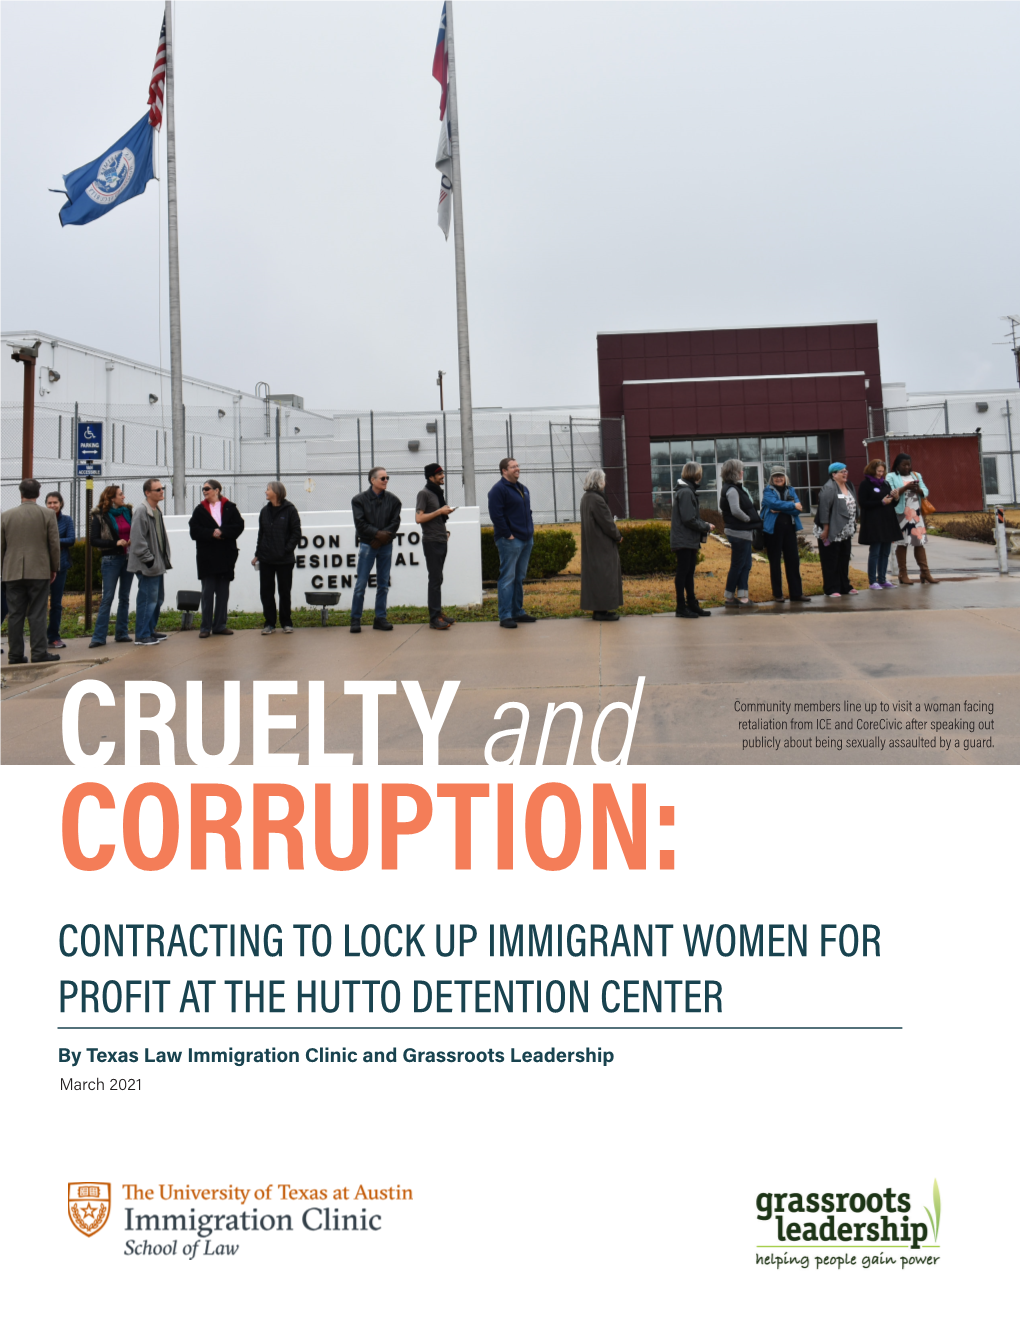 Contracting to Lock up Immigrant Women for Profit at the Hutto Detention Center